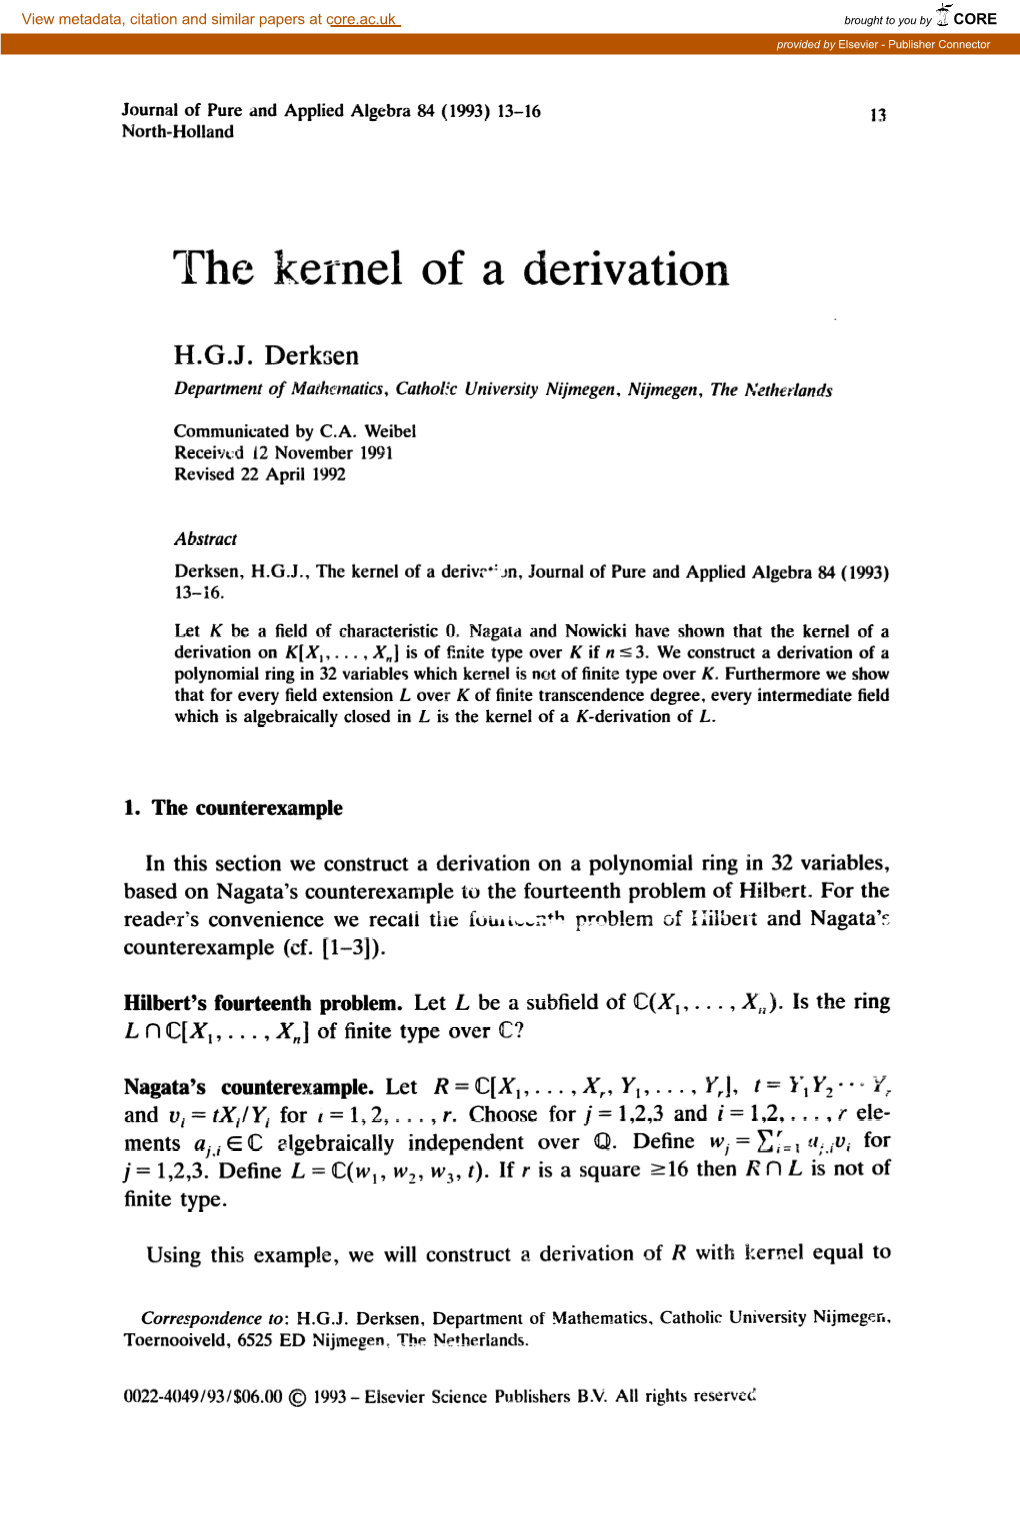 The Kernel of a Derivation